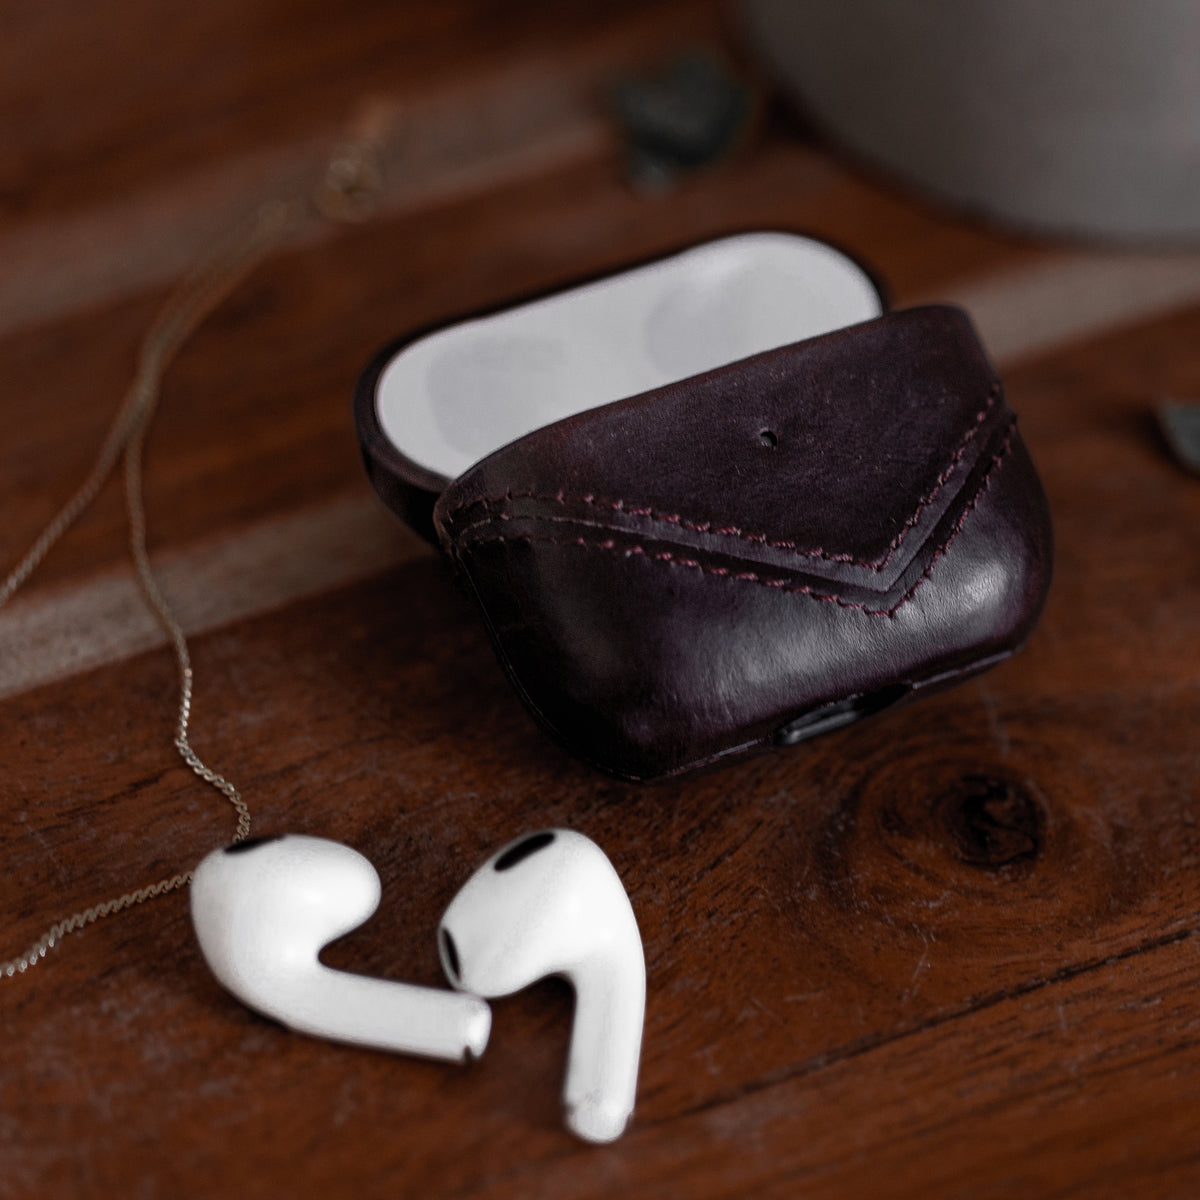 6 Best Apple AirPods Pro Leather Cases That You Can Buy